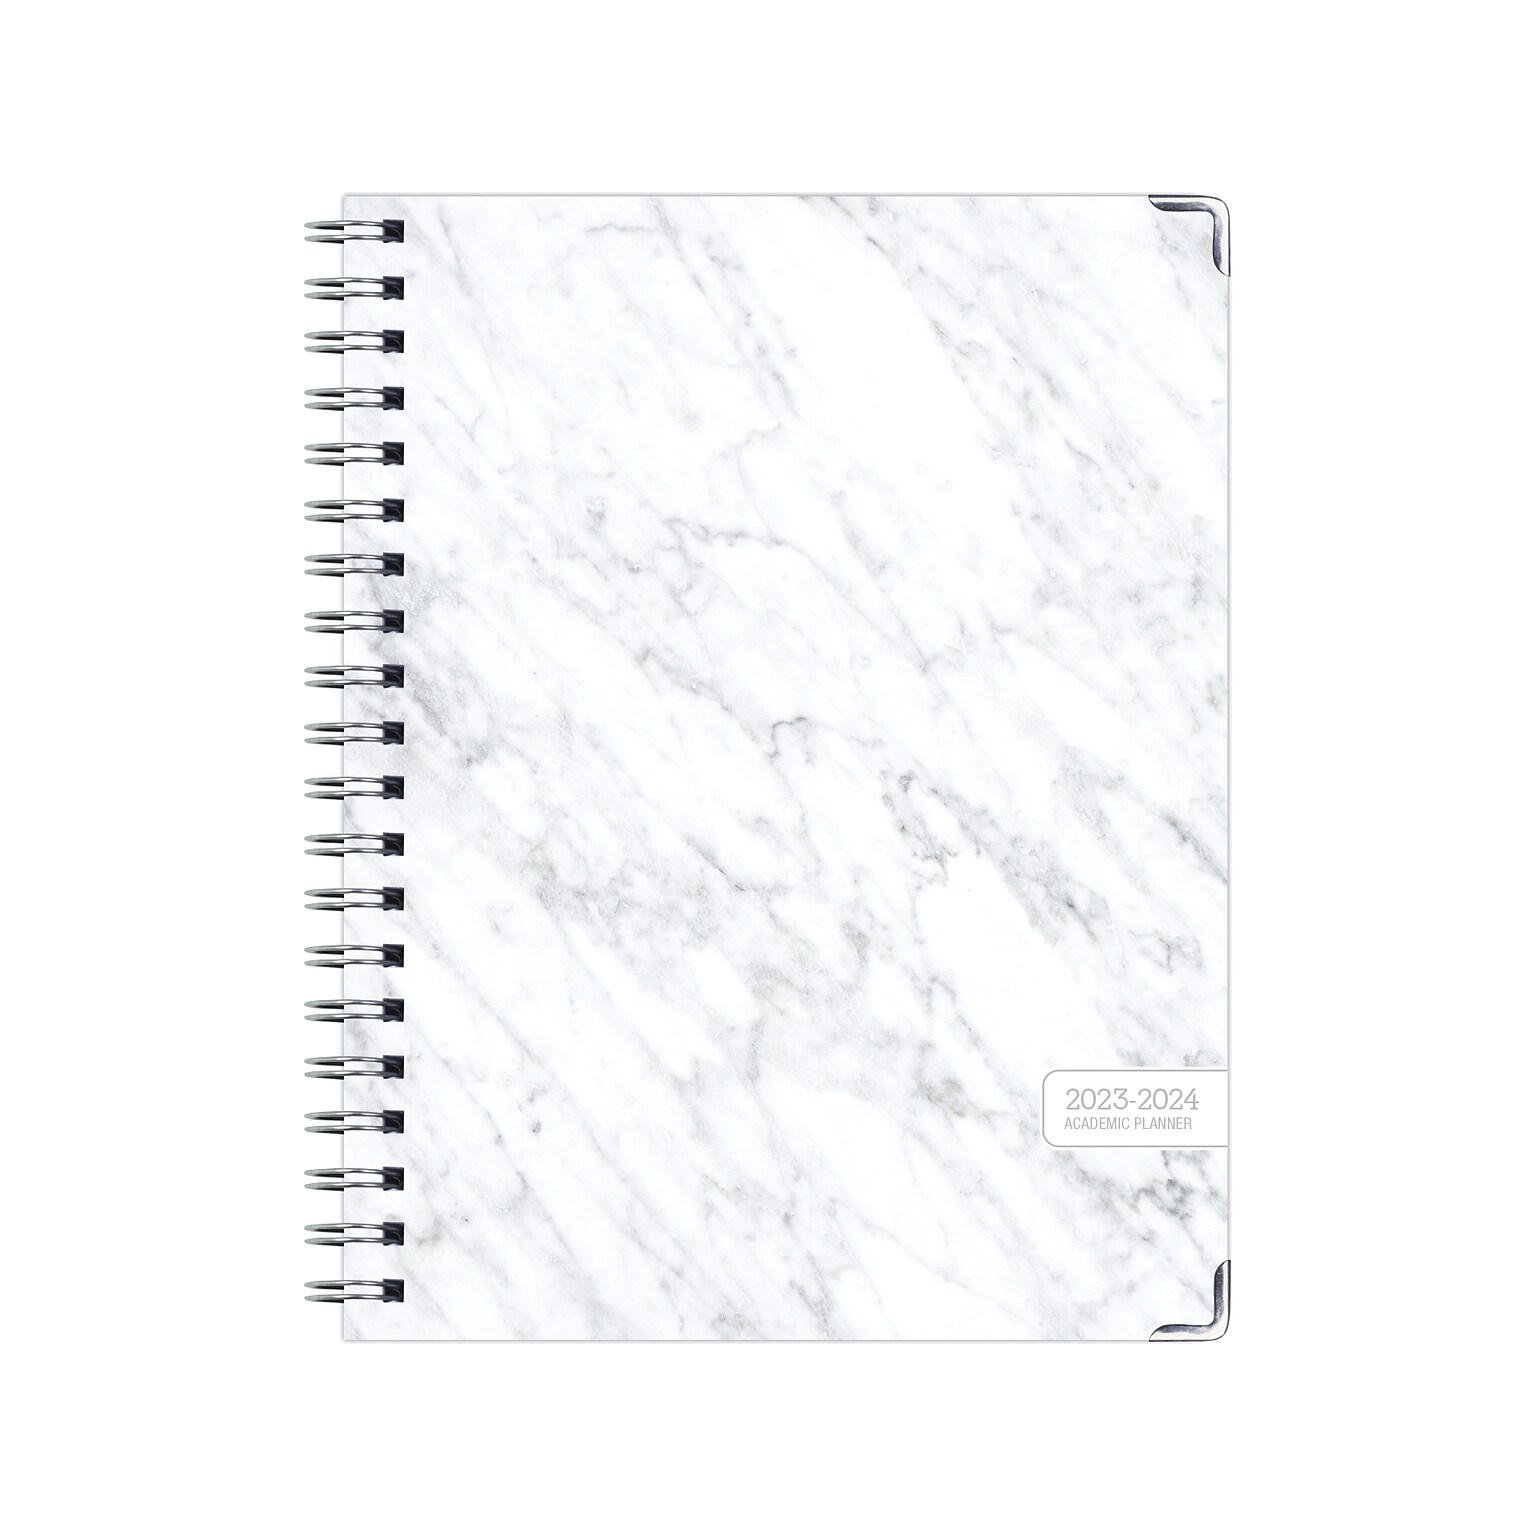 2023-2024 Global Printed Products Gray Marble 8.5 x 11 Academic Weekly & Monthly Planner, Paperboard Cover (AY23-8511-06-S)